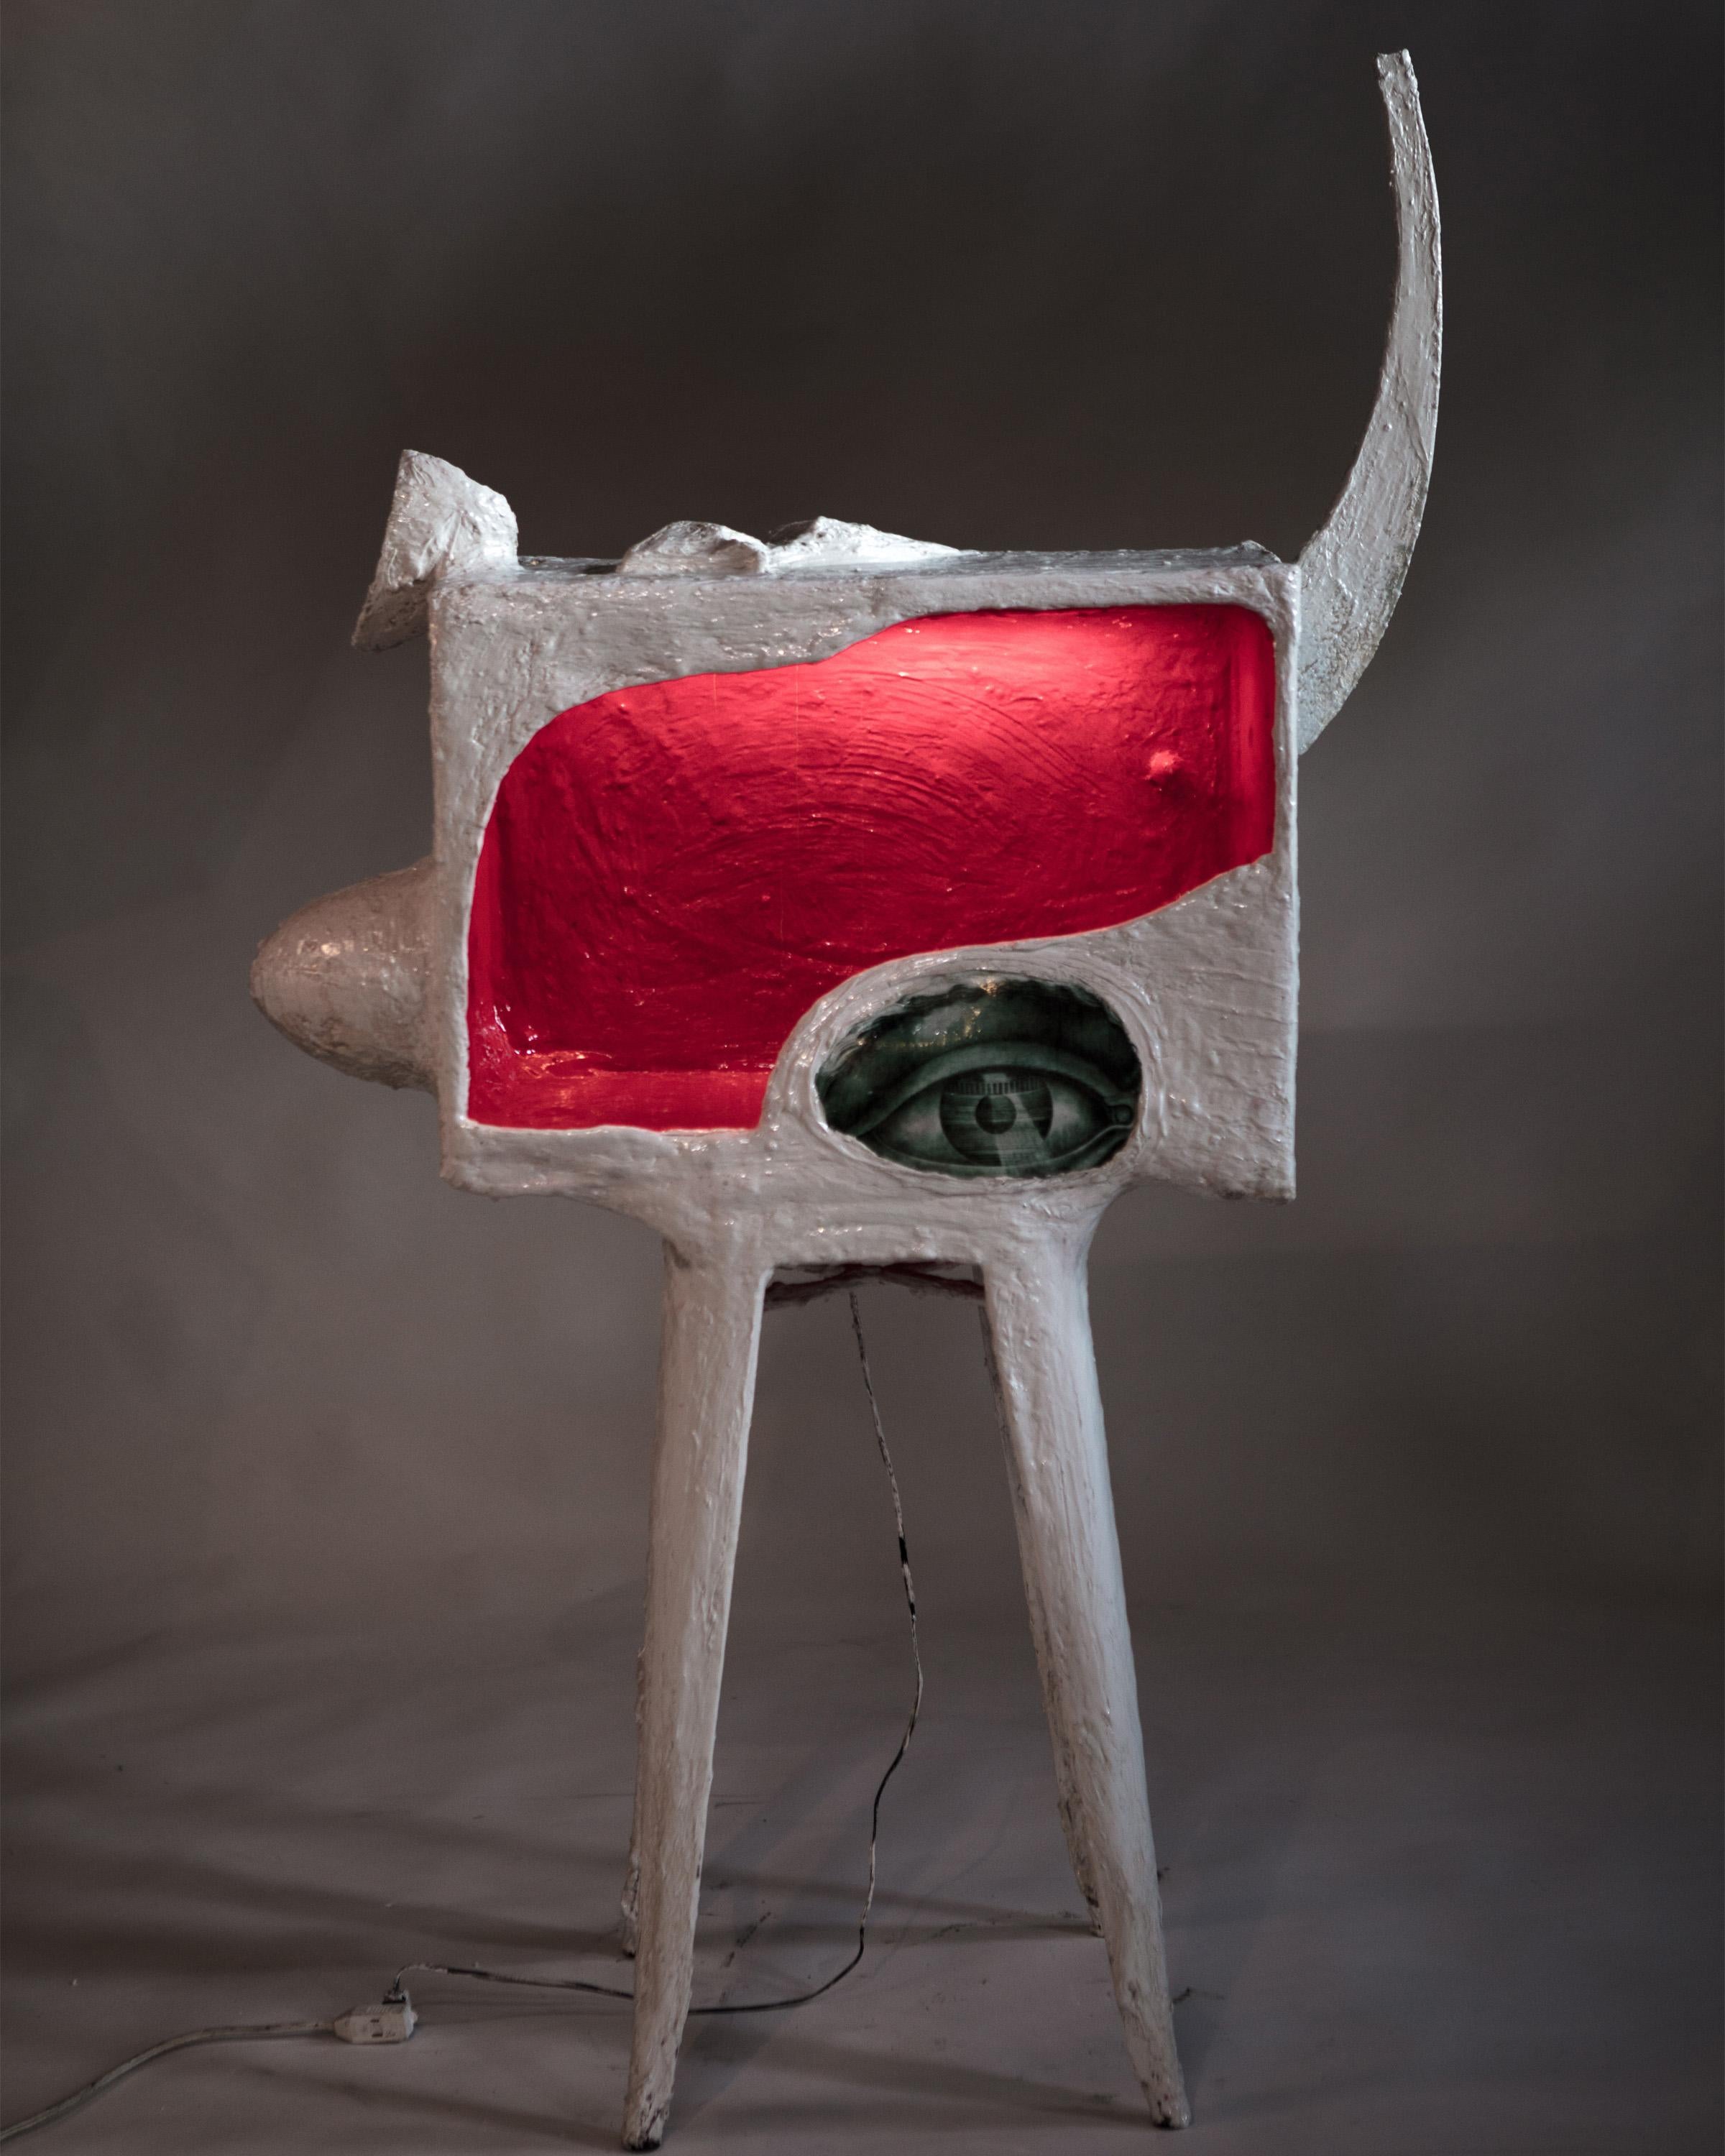 American Sculptural White and Red Plaster Bar, 21st Century by Mattia Biagi For Sale